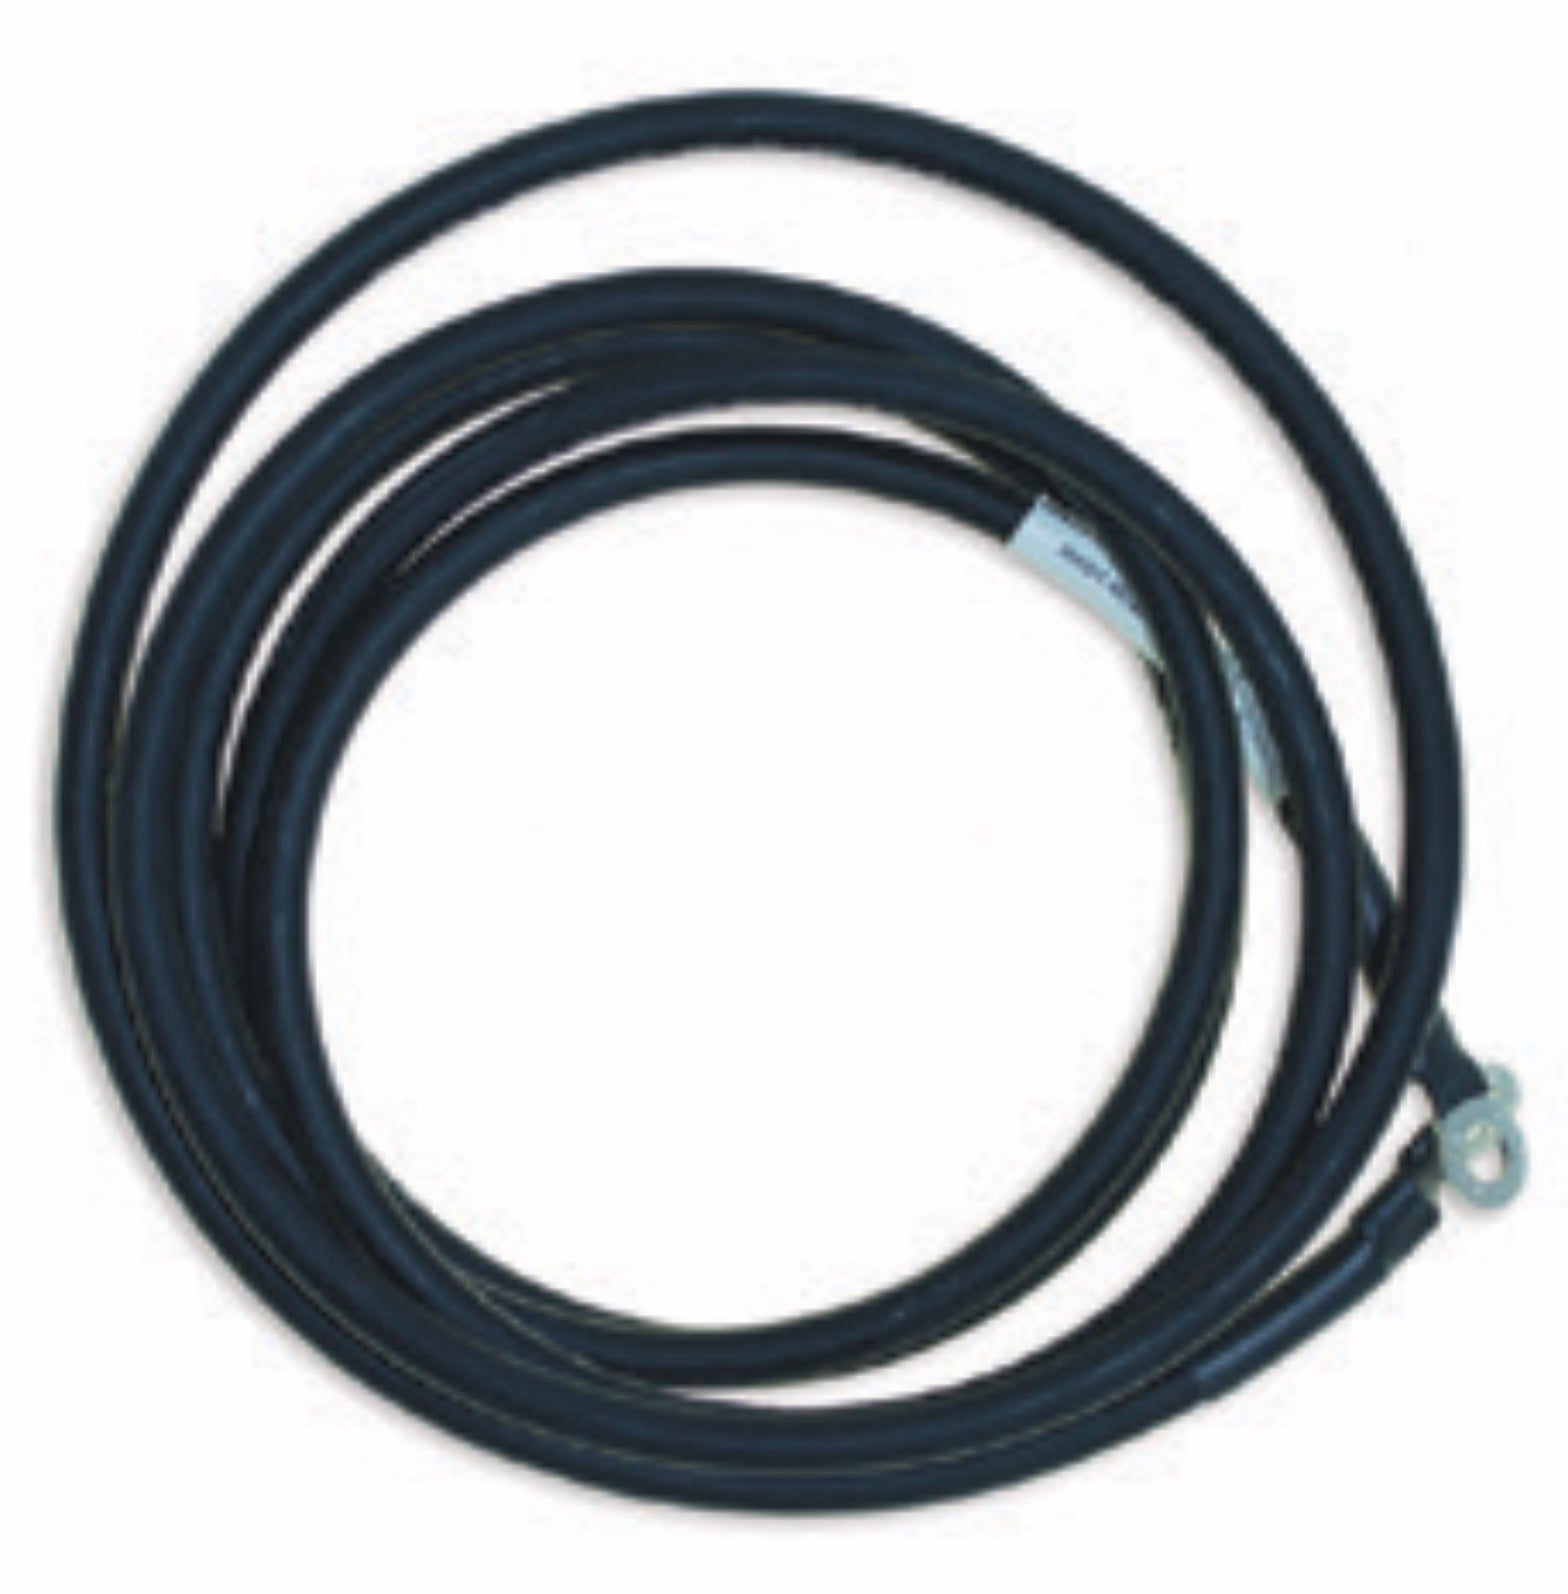 8 ft black battery cable